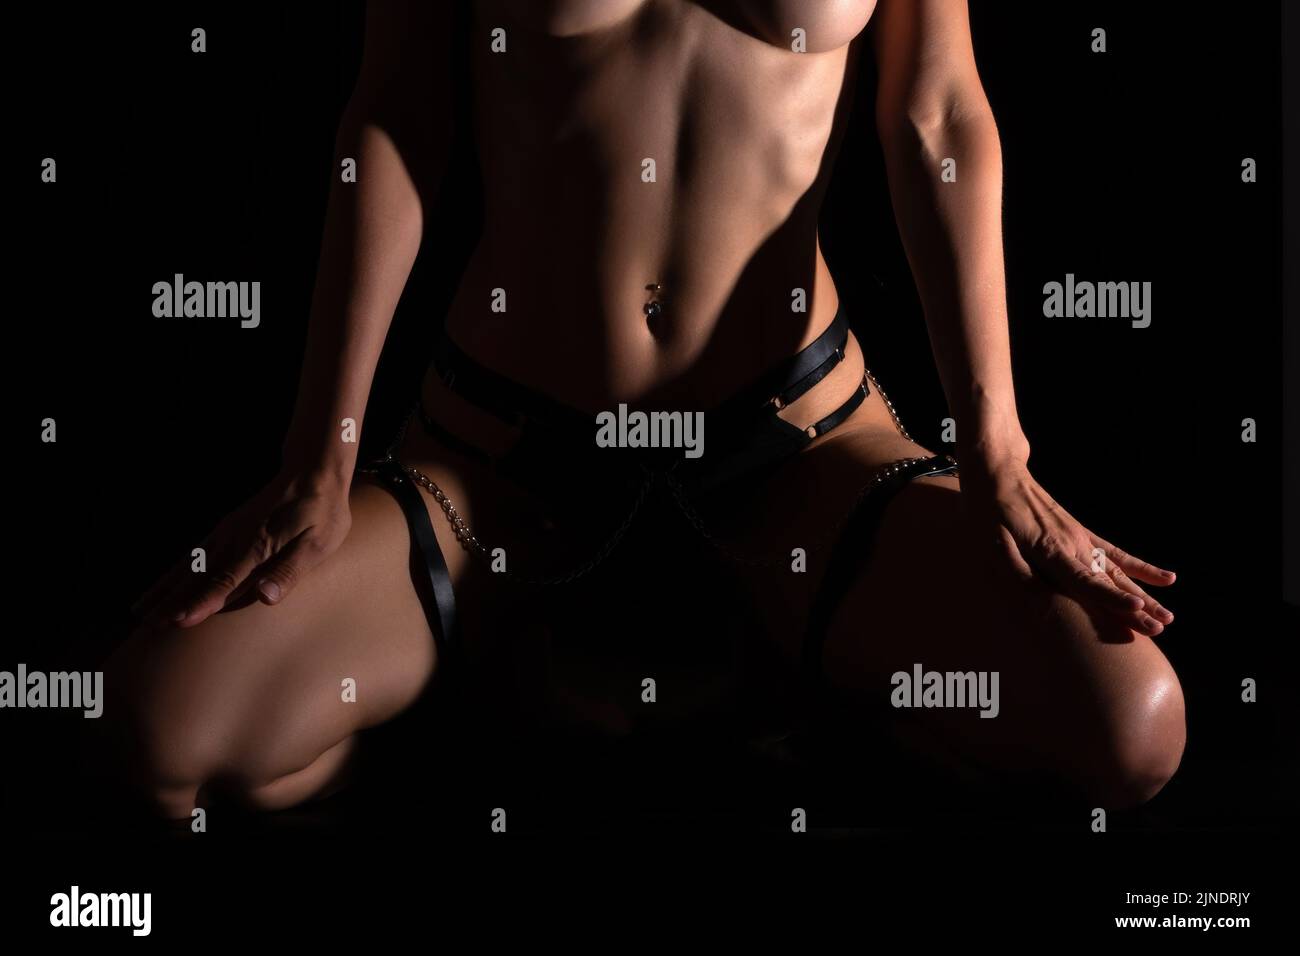 Beautiful athletic young woman body on black. Nude body with water drops. Stock Photo